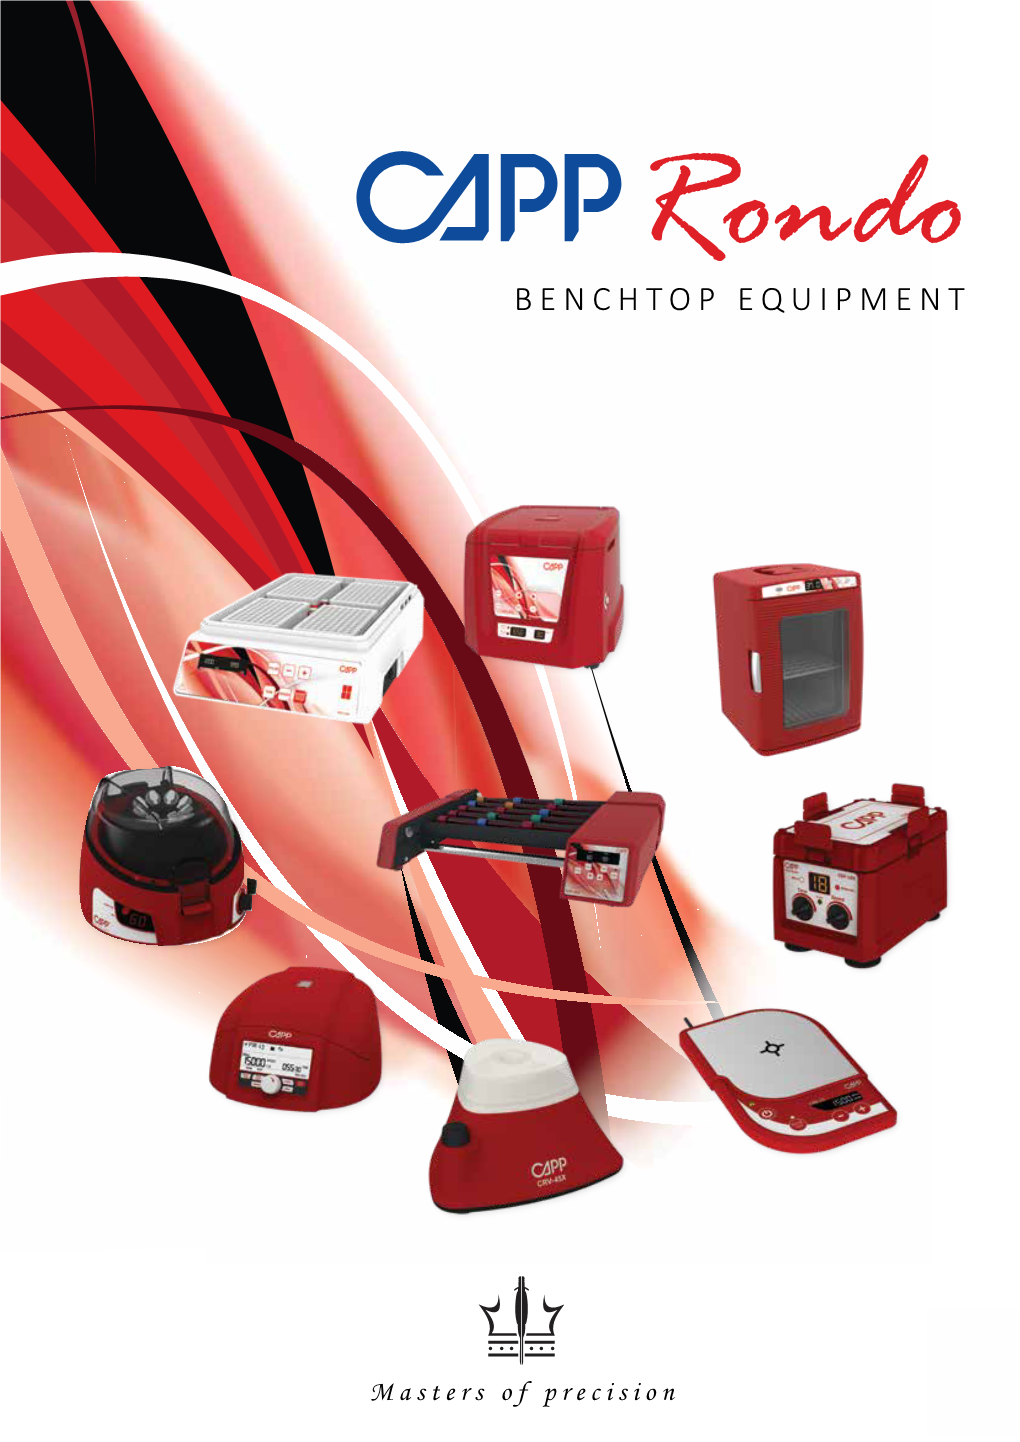 Capprondo Benchtop Equipment Is a Unique Line of Instruments, Including Multiple Centrifuges and Mixing Equipment